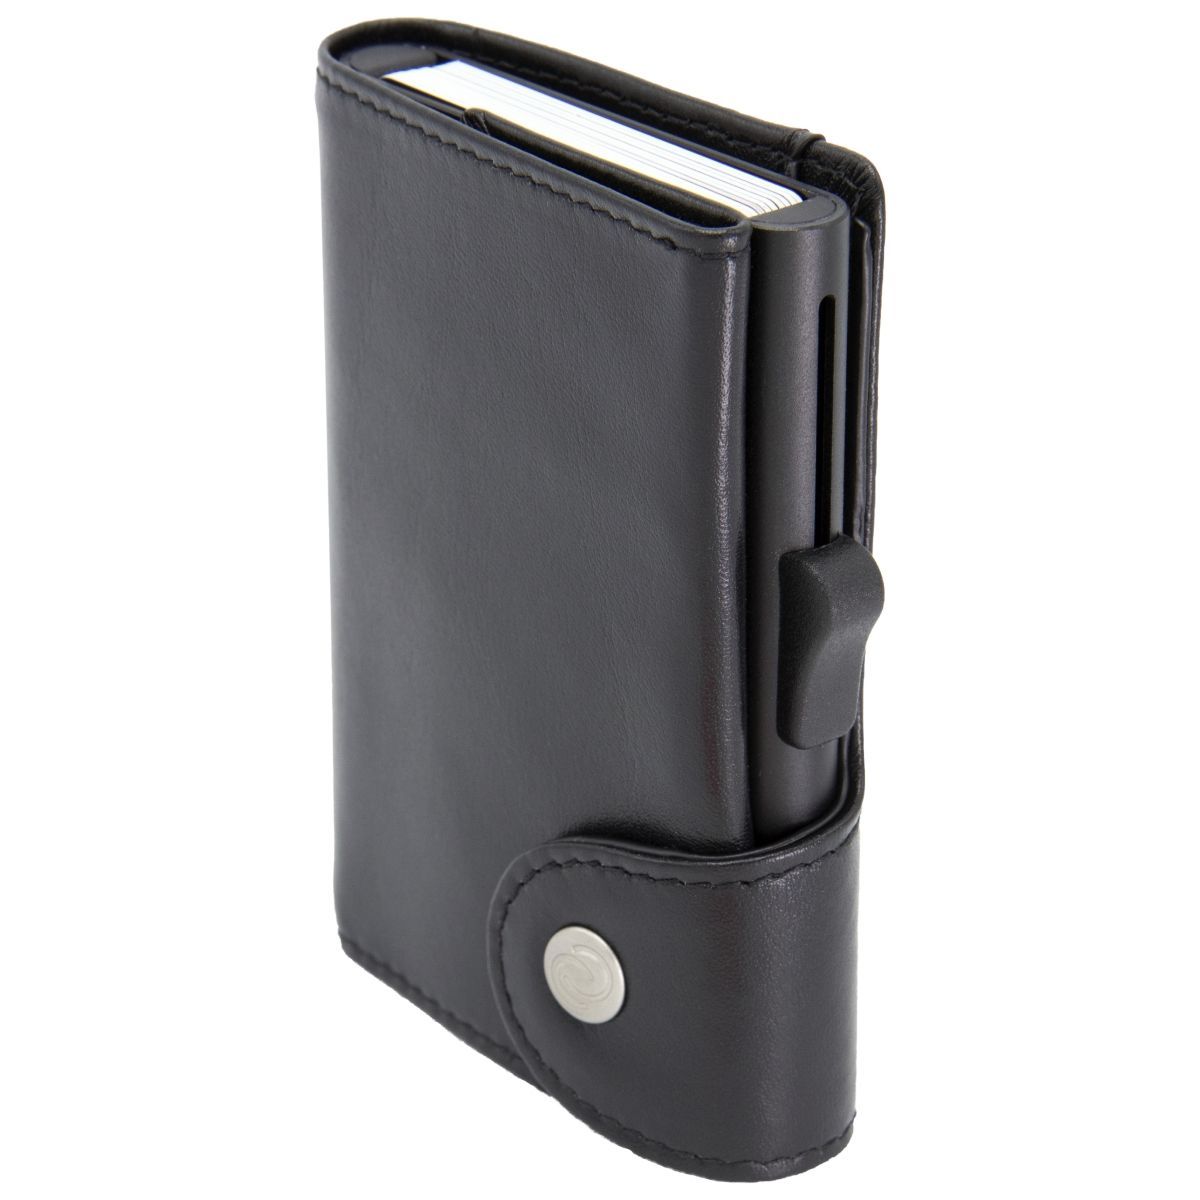 C-Secure XL Aluminum Card Holder with Genuine Leather - Black